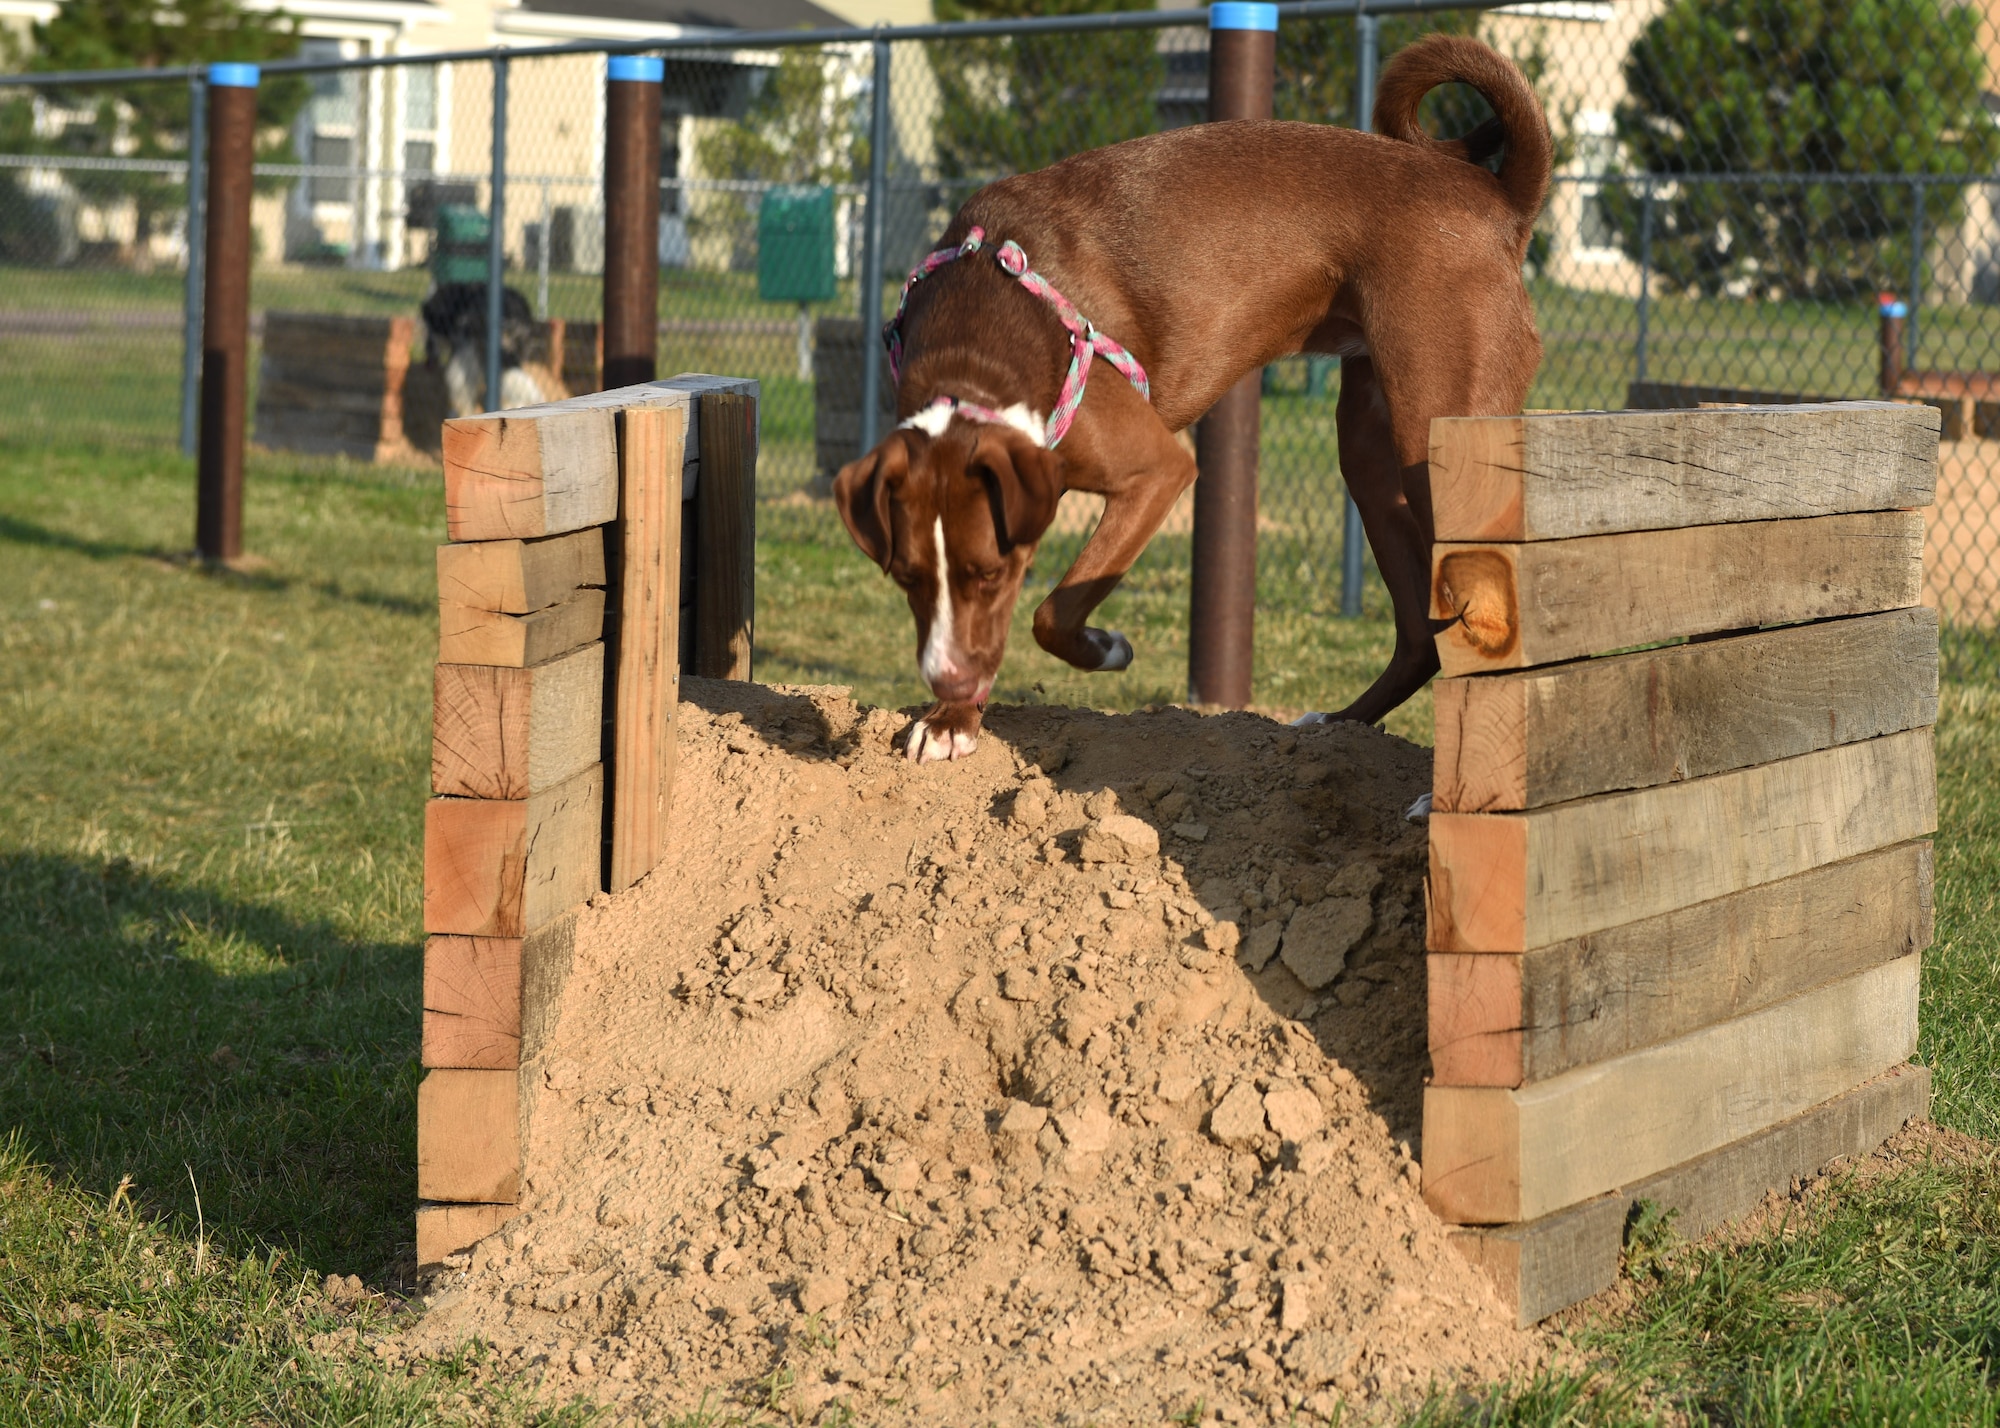 Remi, checks out the new obstacles at the dog park on Buckley Air Force Base, Colo., Aug. 4, 2020. New ramps, hurdles, tunnels and poles to weave through were installed by a local Eagle Scout as part of a community project. (U.S. Air Force photo by Airman 1st Class Haley N. Blevins)